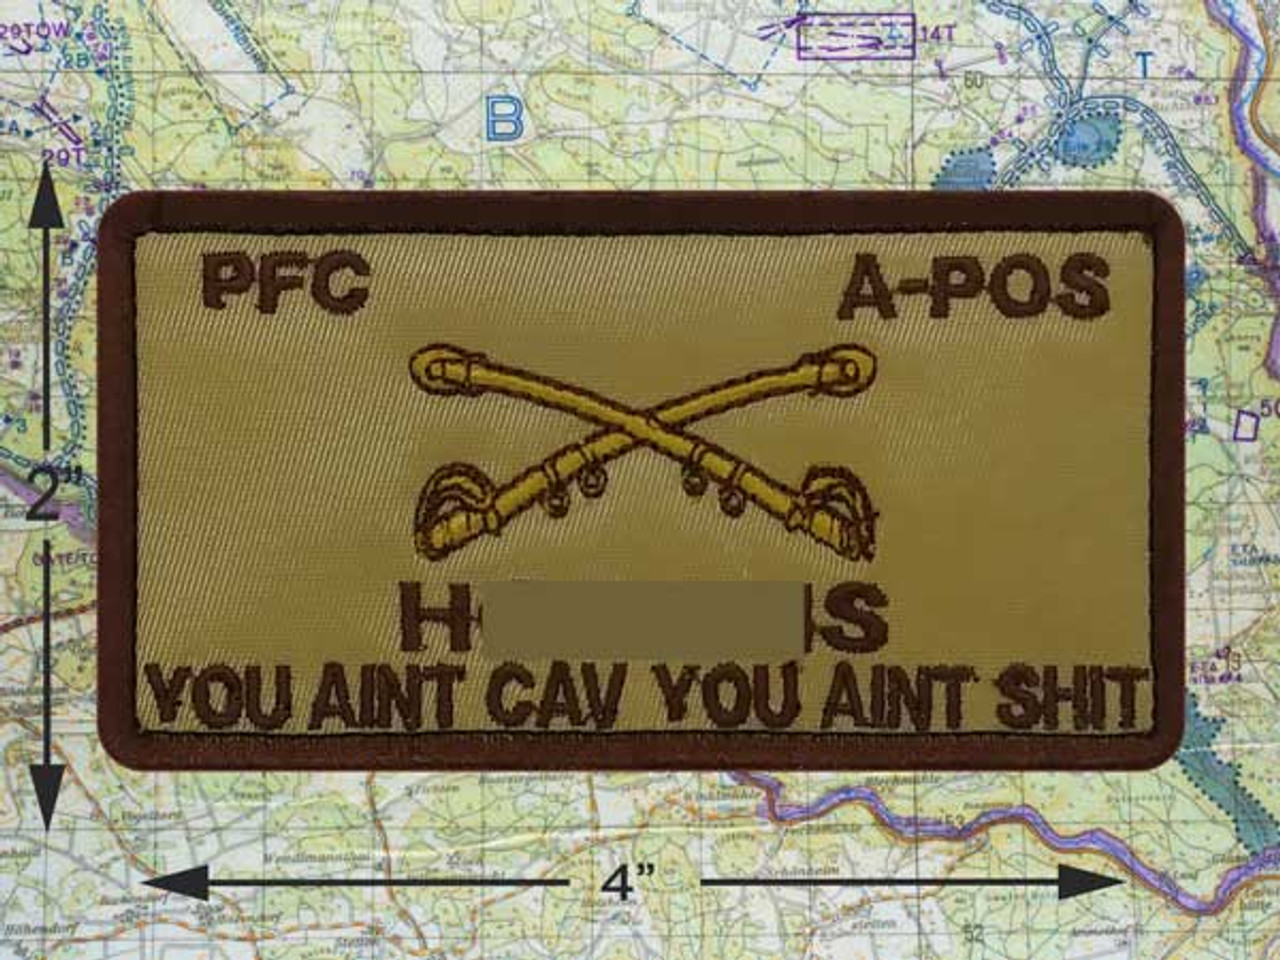 US Navy Flak Plate Carrier Patch